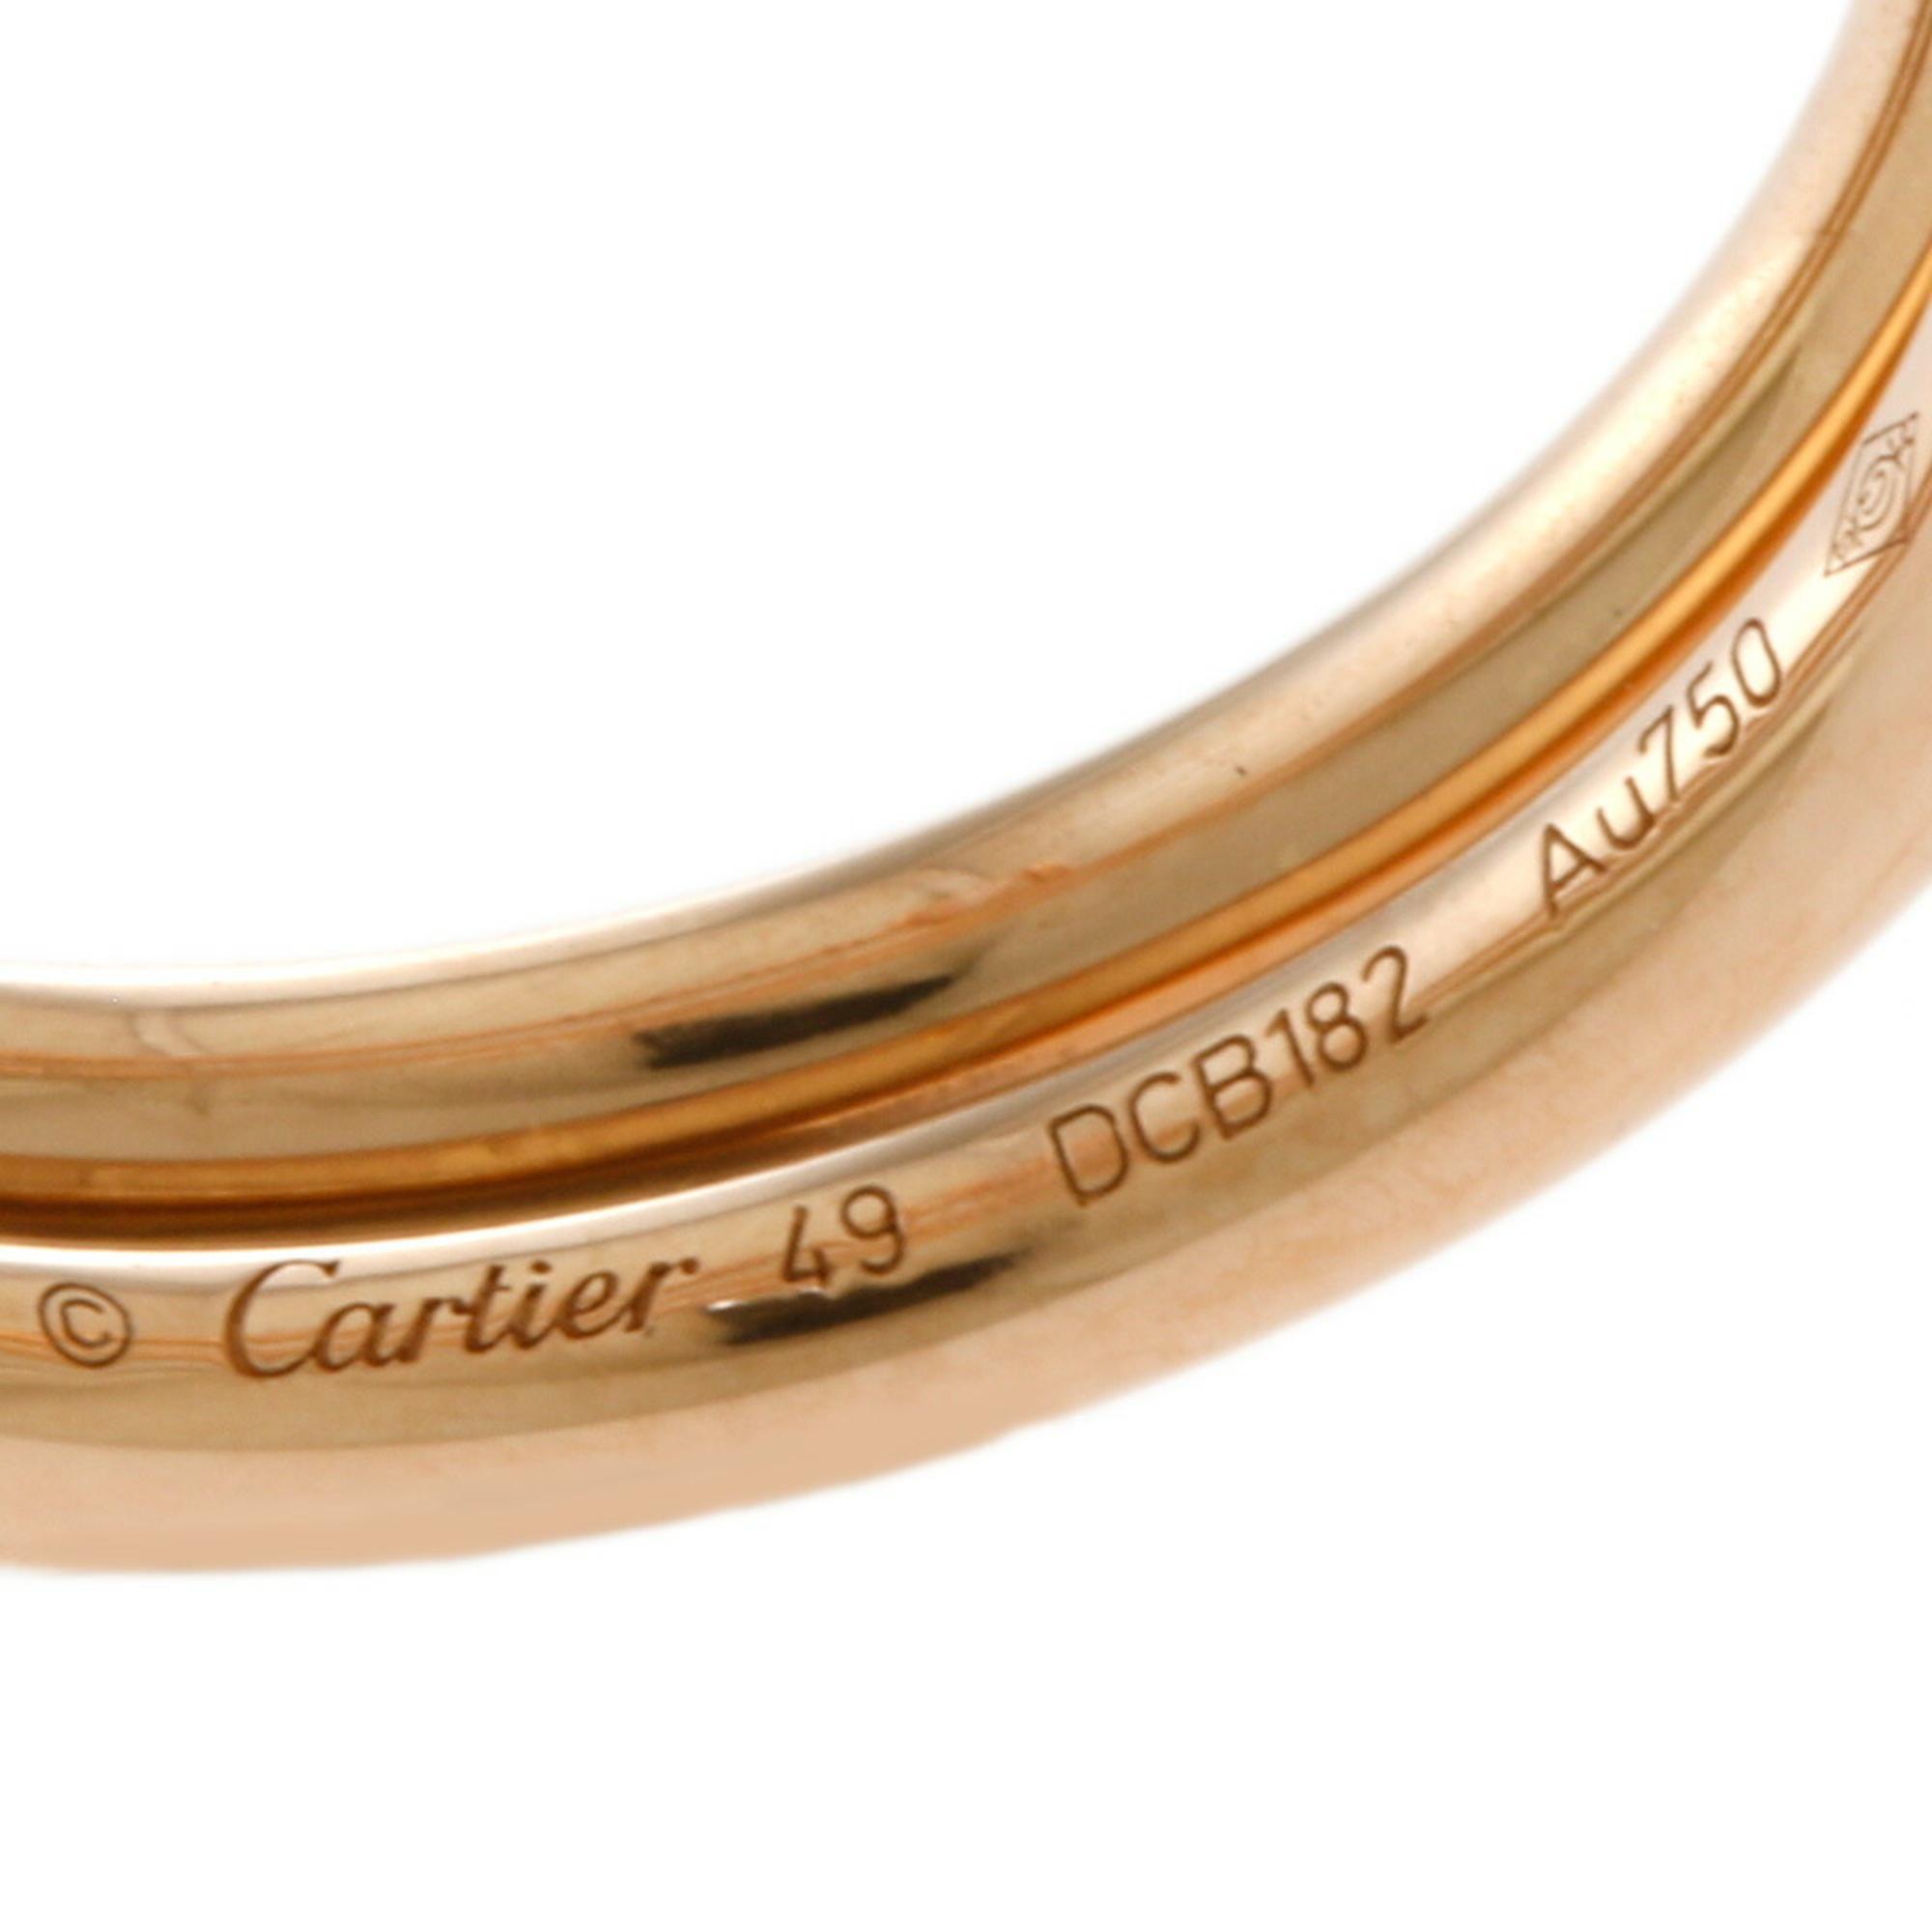 Cartier Just Ankle Diamond Ring No. 7 18K K18 Pink Gold Ladies CARTIER